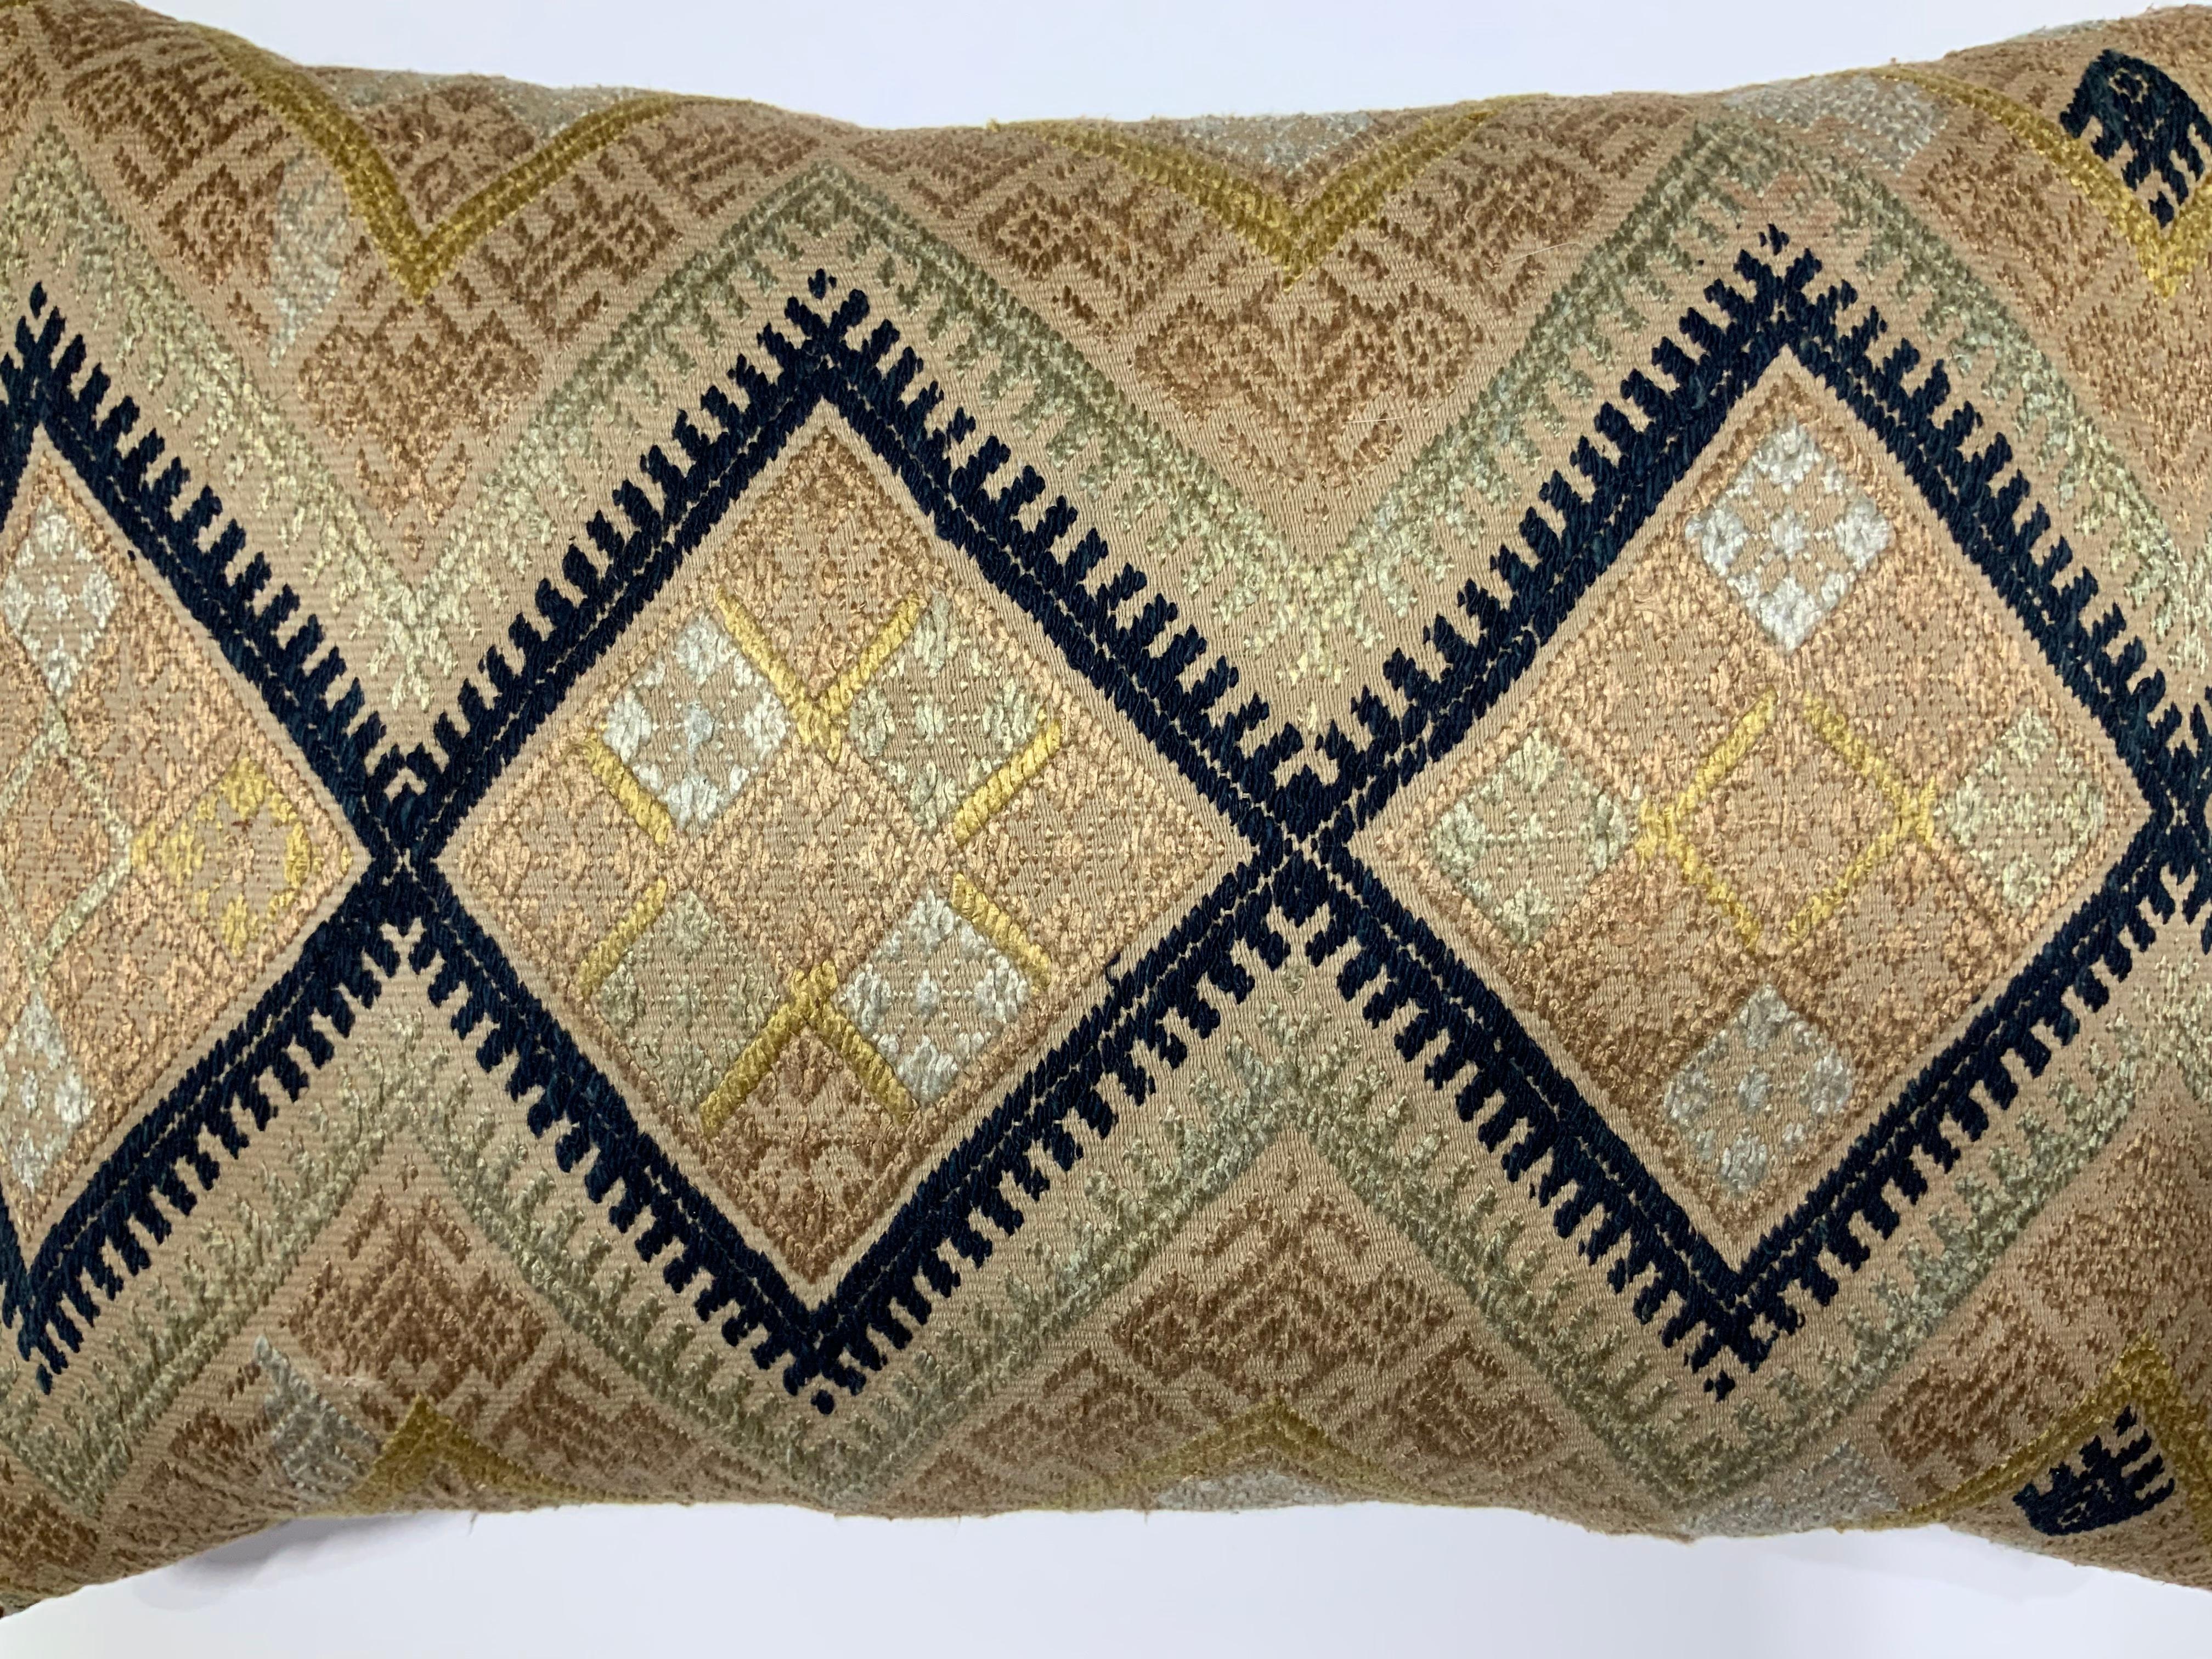 Hand-Woven Vintage Hand Embroidery Suzani Pillow